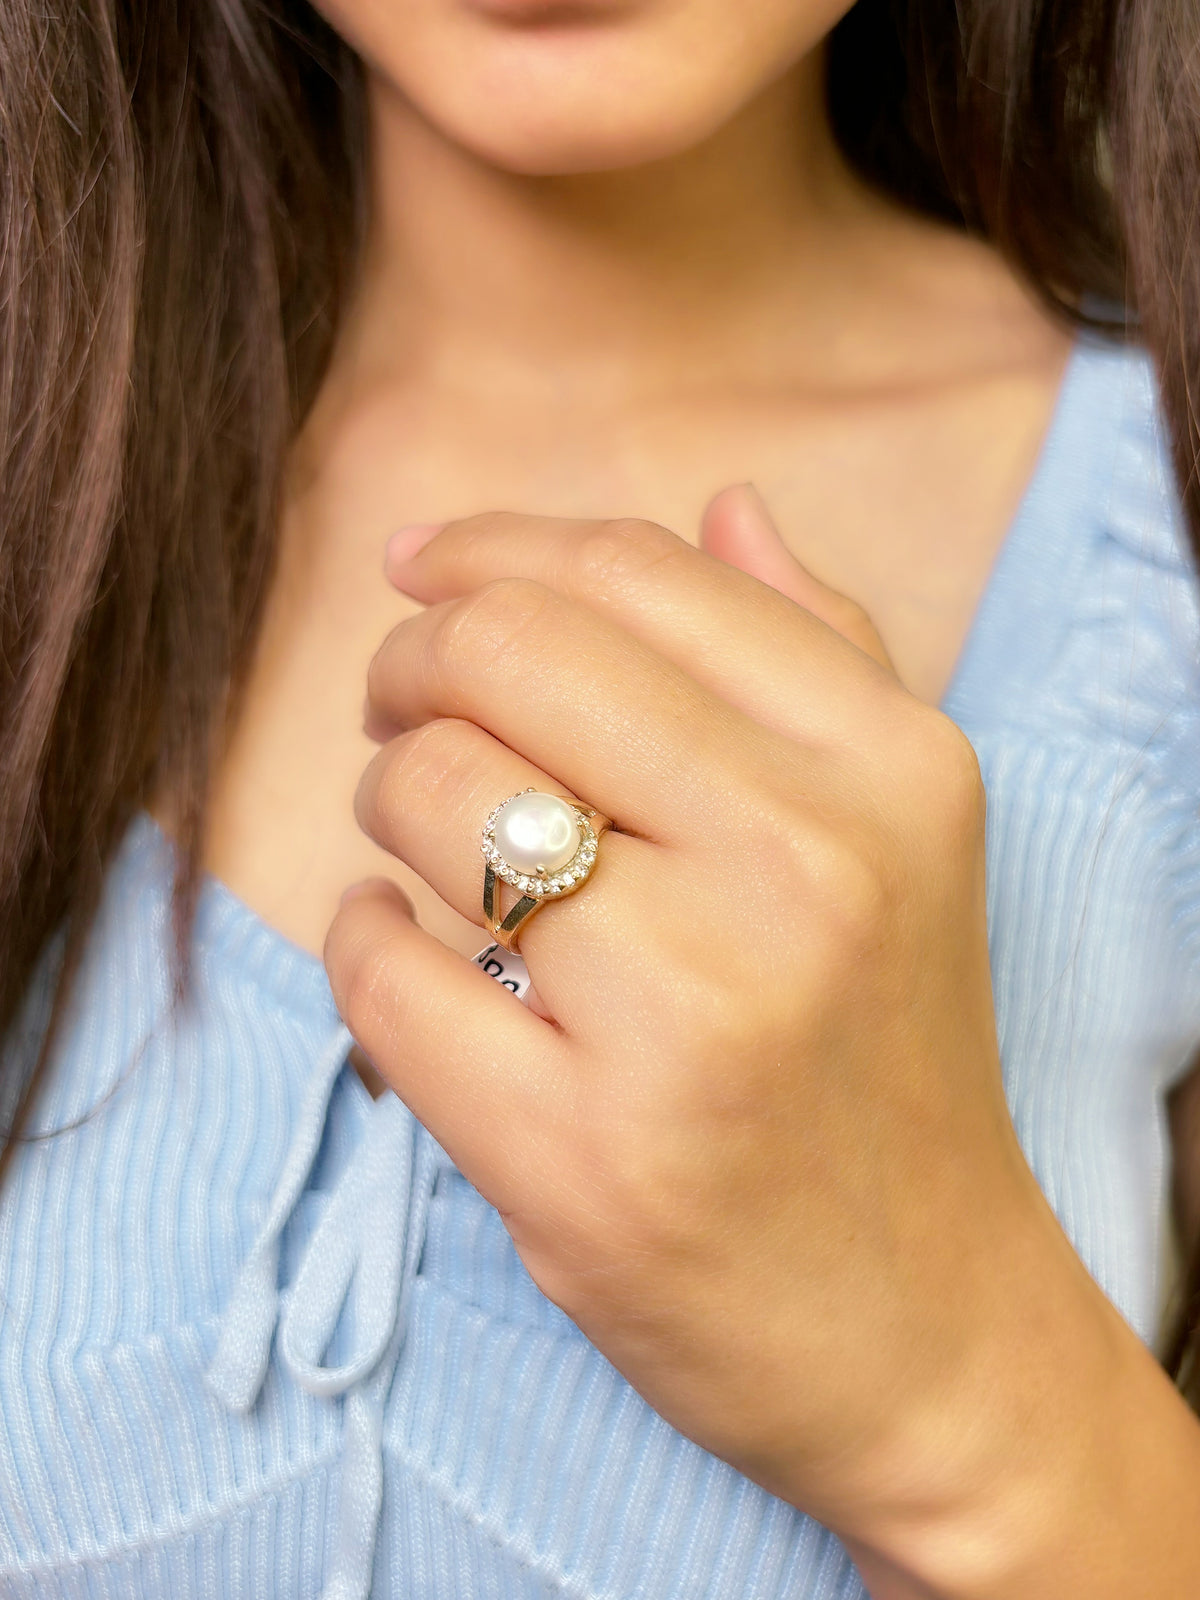 Silver pearl Ring